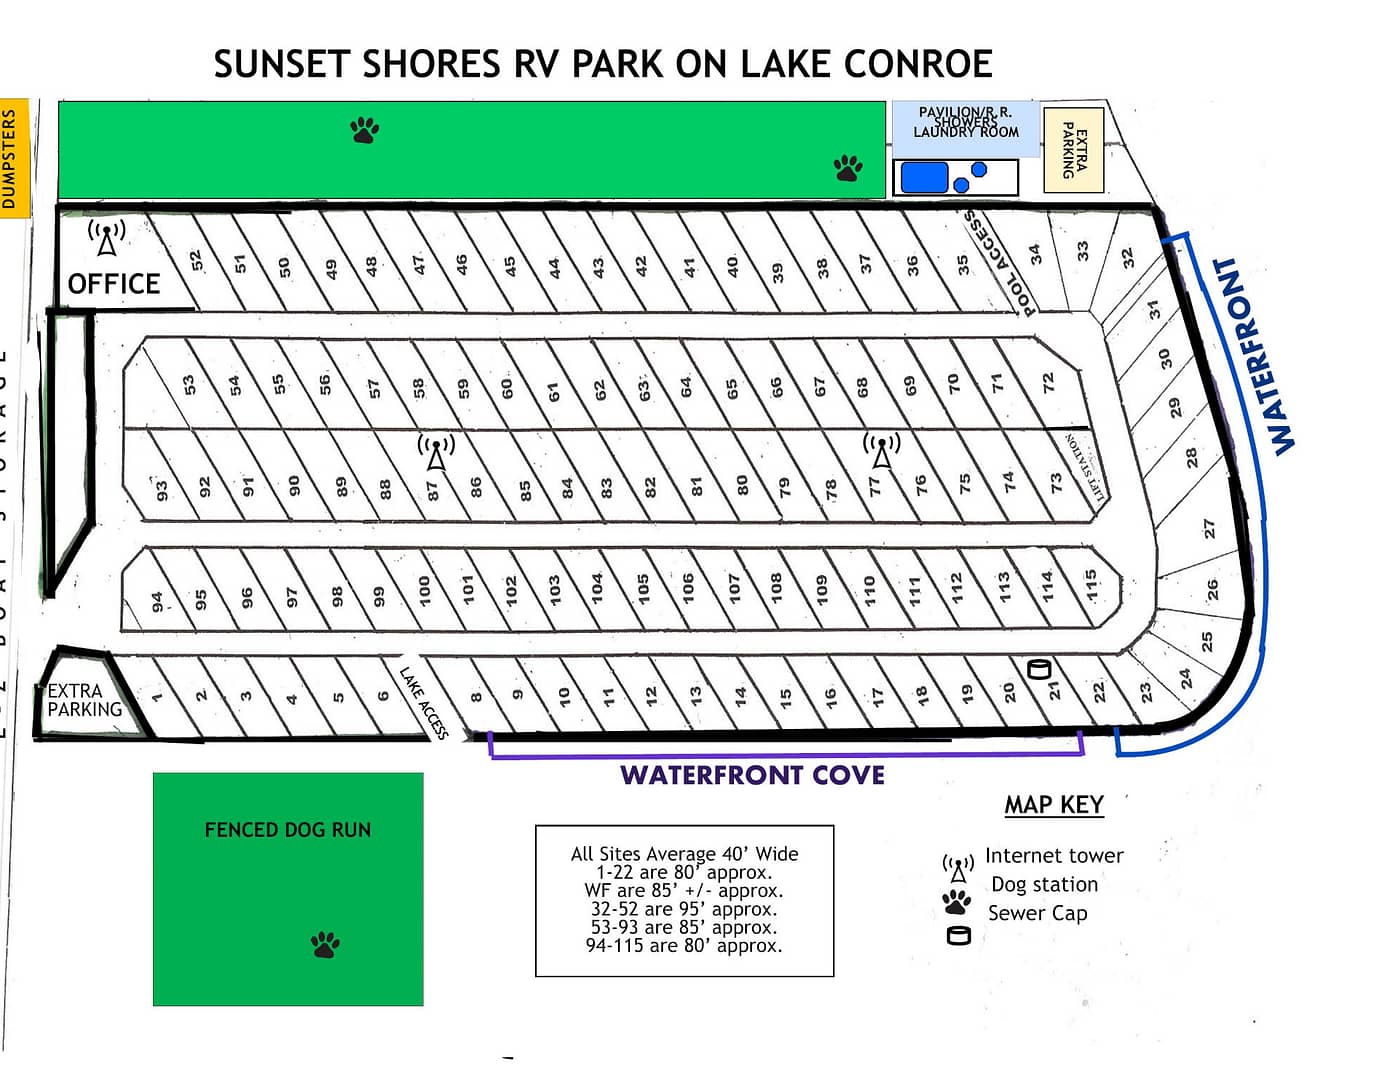 Sunset Shores Site Layout with rates